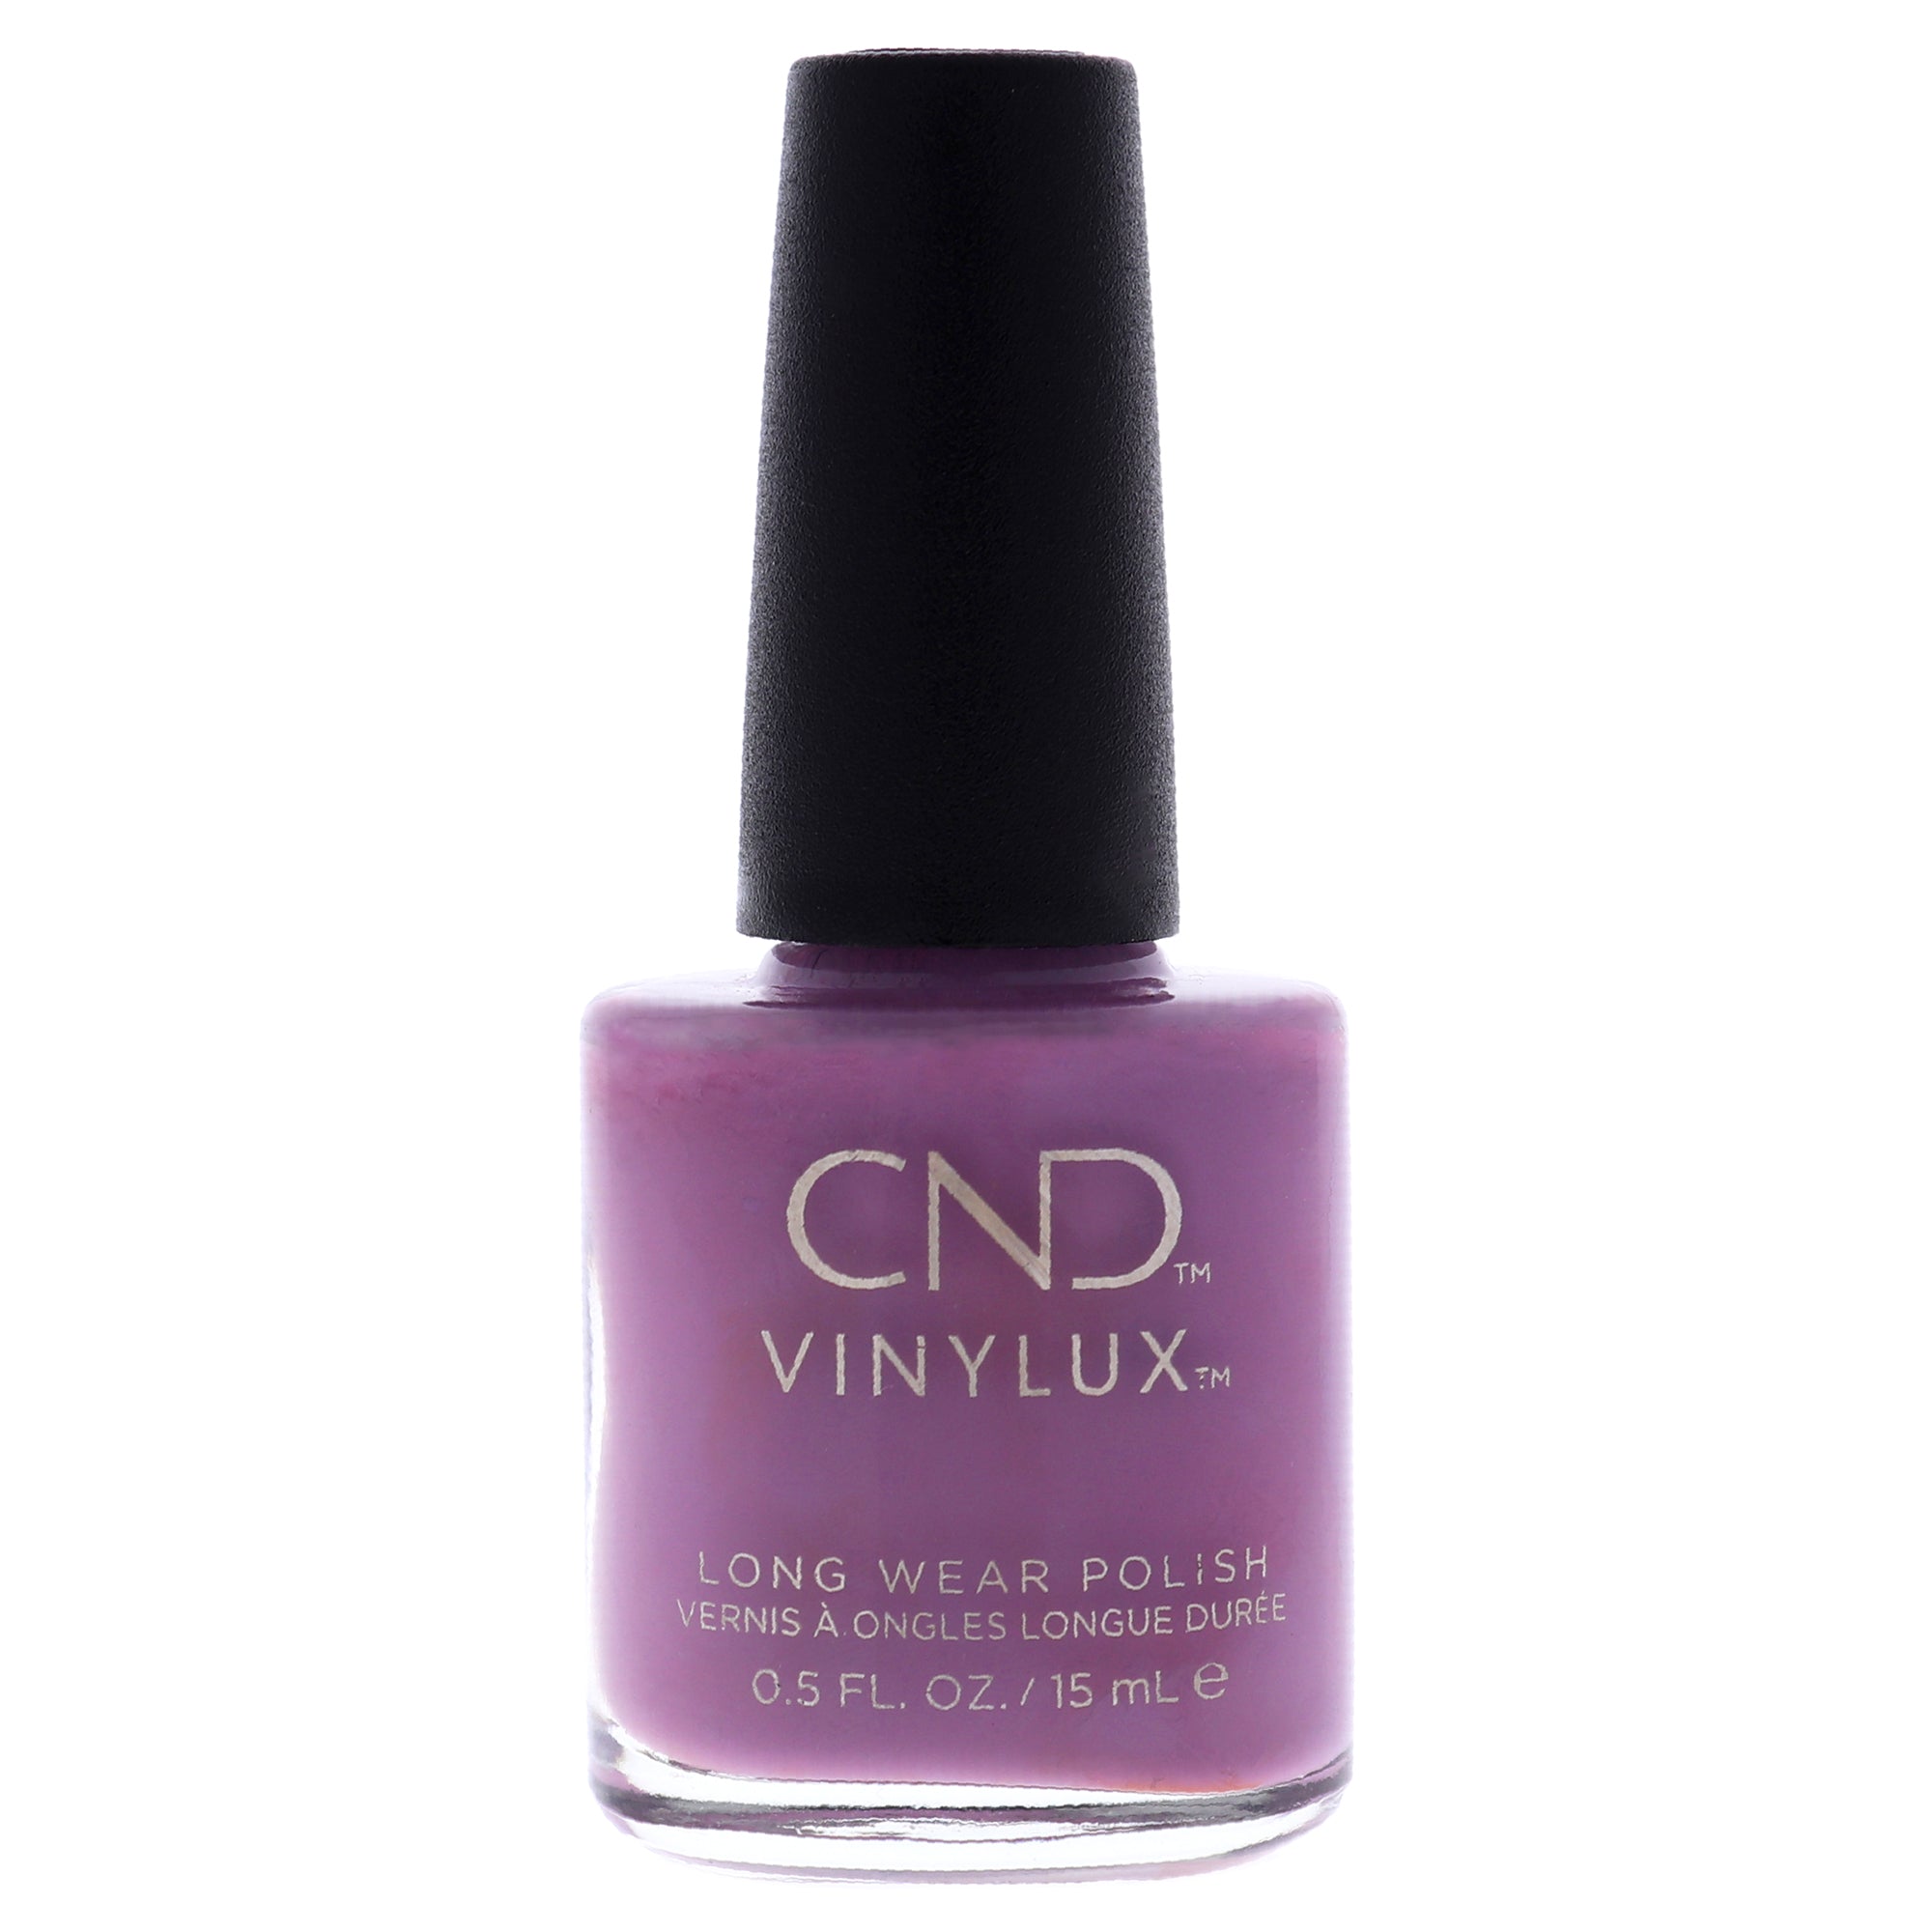 Vinylux Weekly Polish - 250 Lilac Eclipse by CND for Women - 0.5 oz Nail Polish